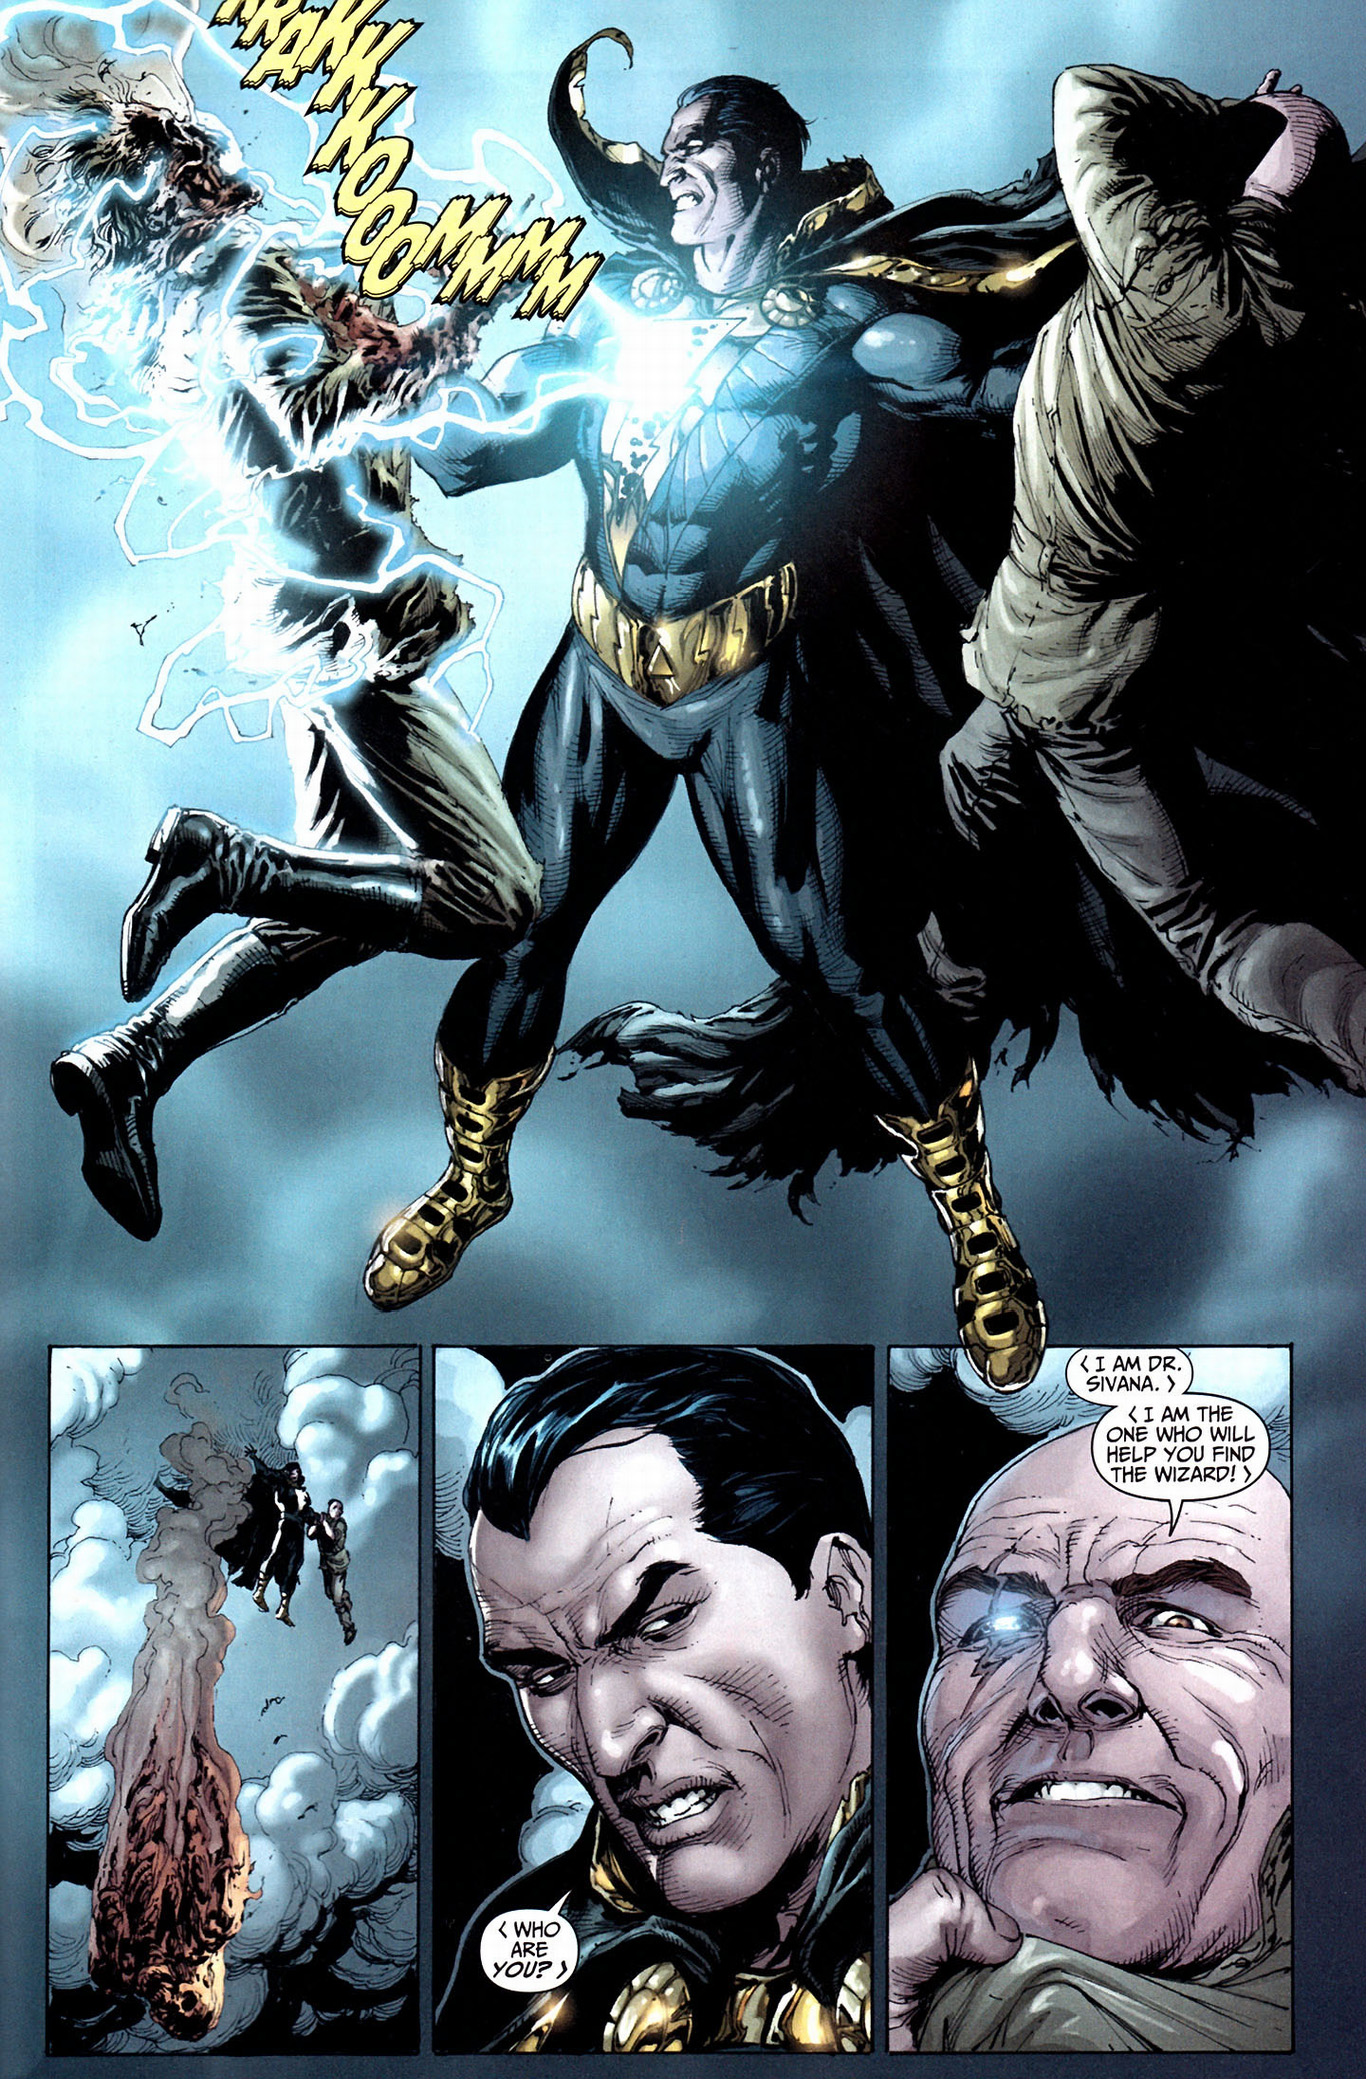 doctor sivana's first meeting with black adam